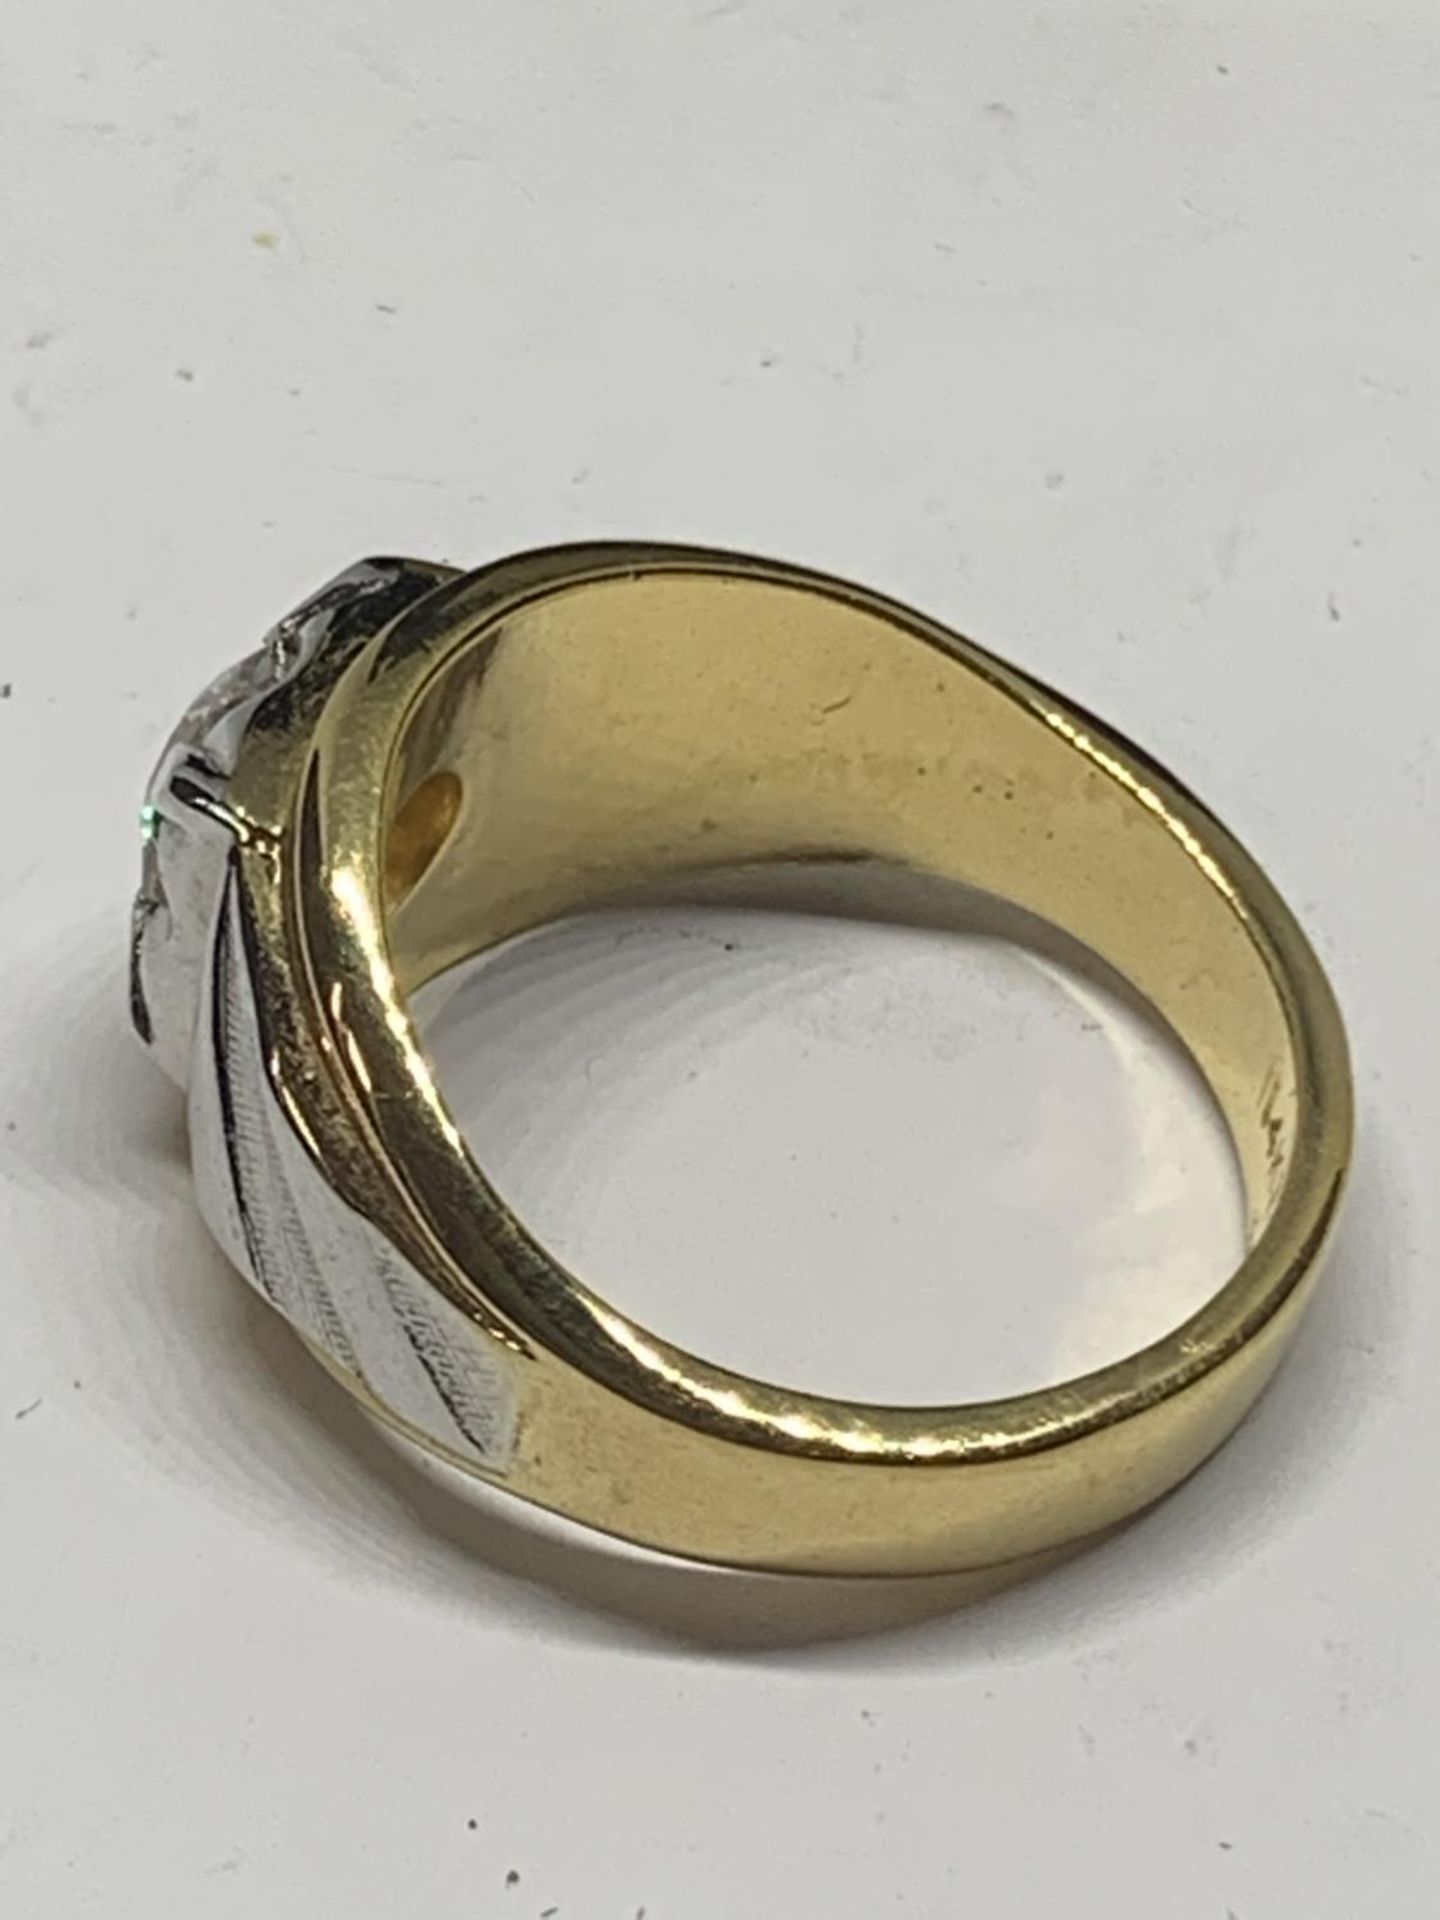 A GENTS RING WITH A CLEAR STONE IN A PRESENTATION BOX - Image 2 of 3